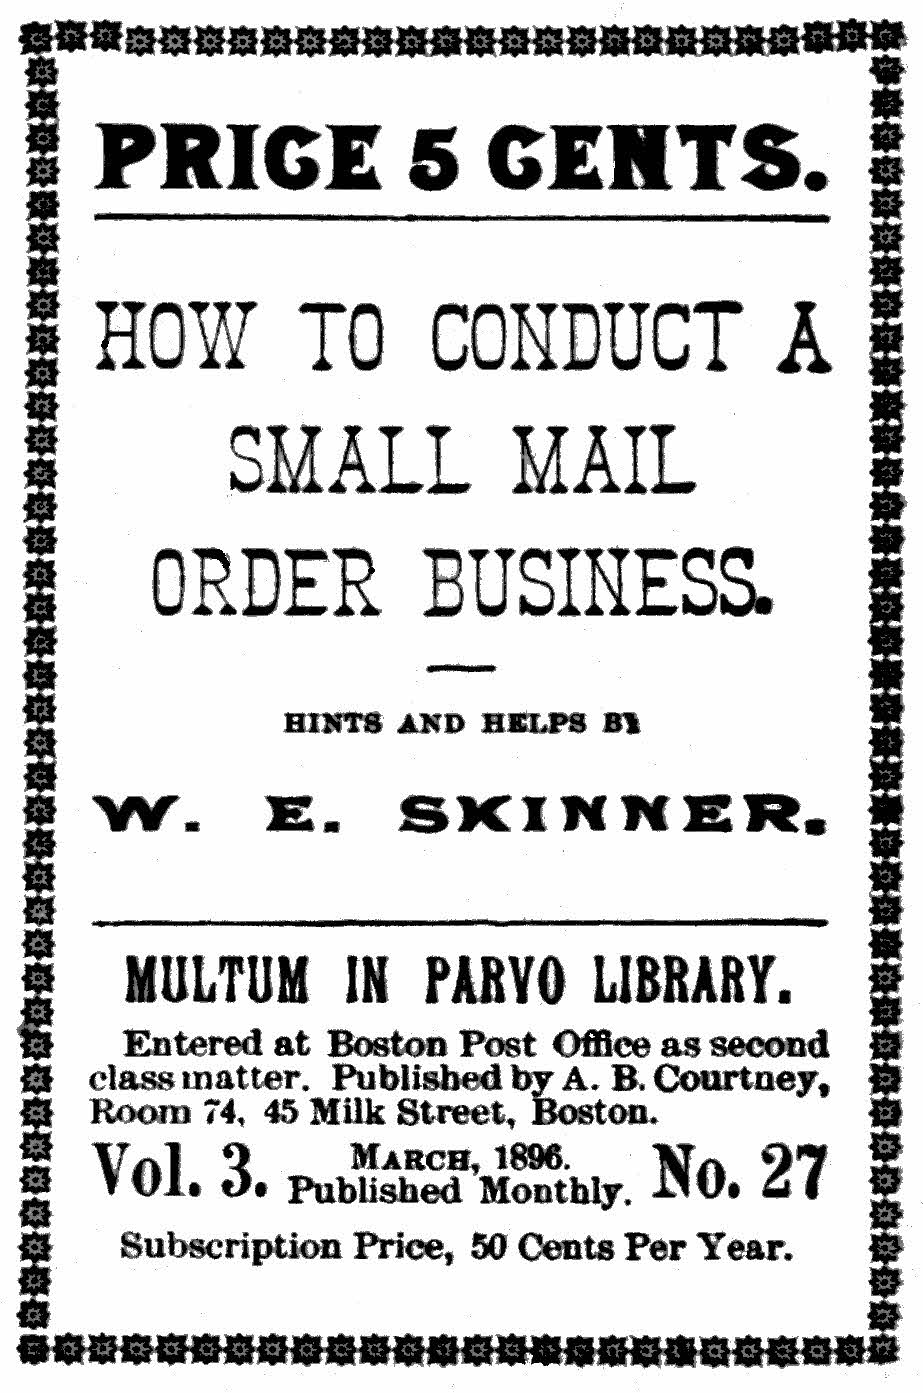 How to conduct a small mail order business